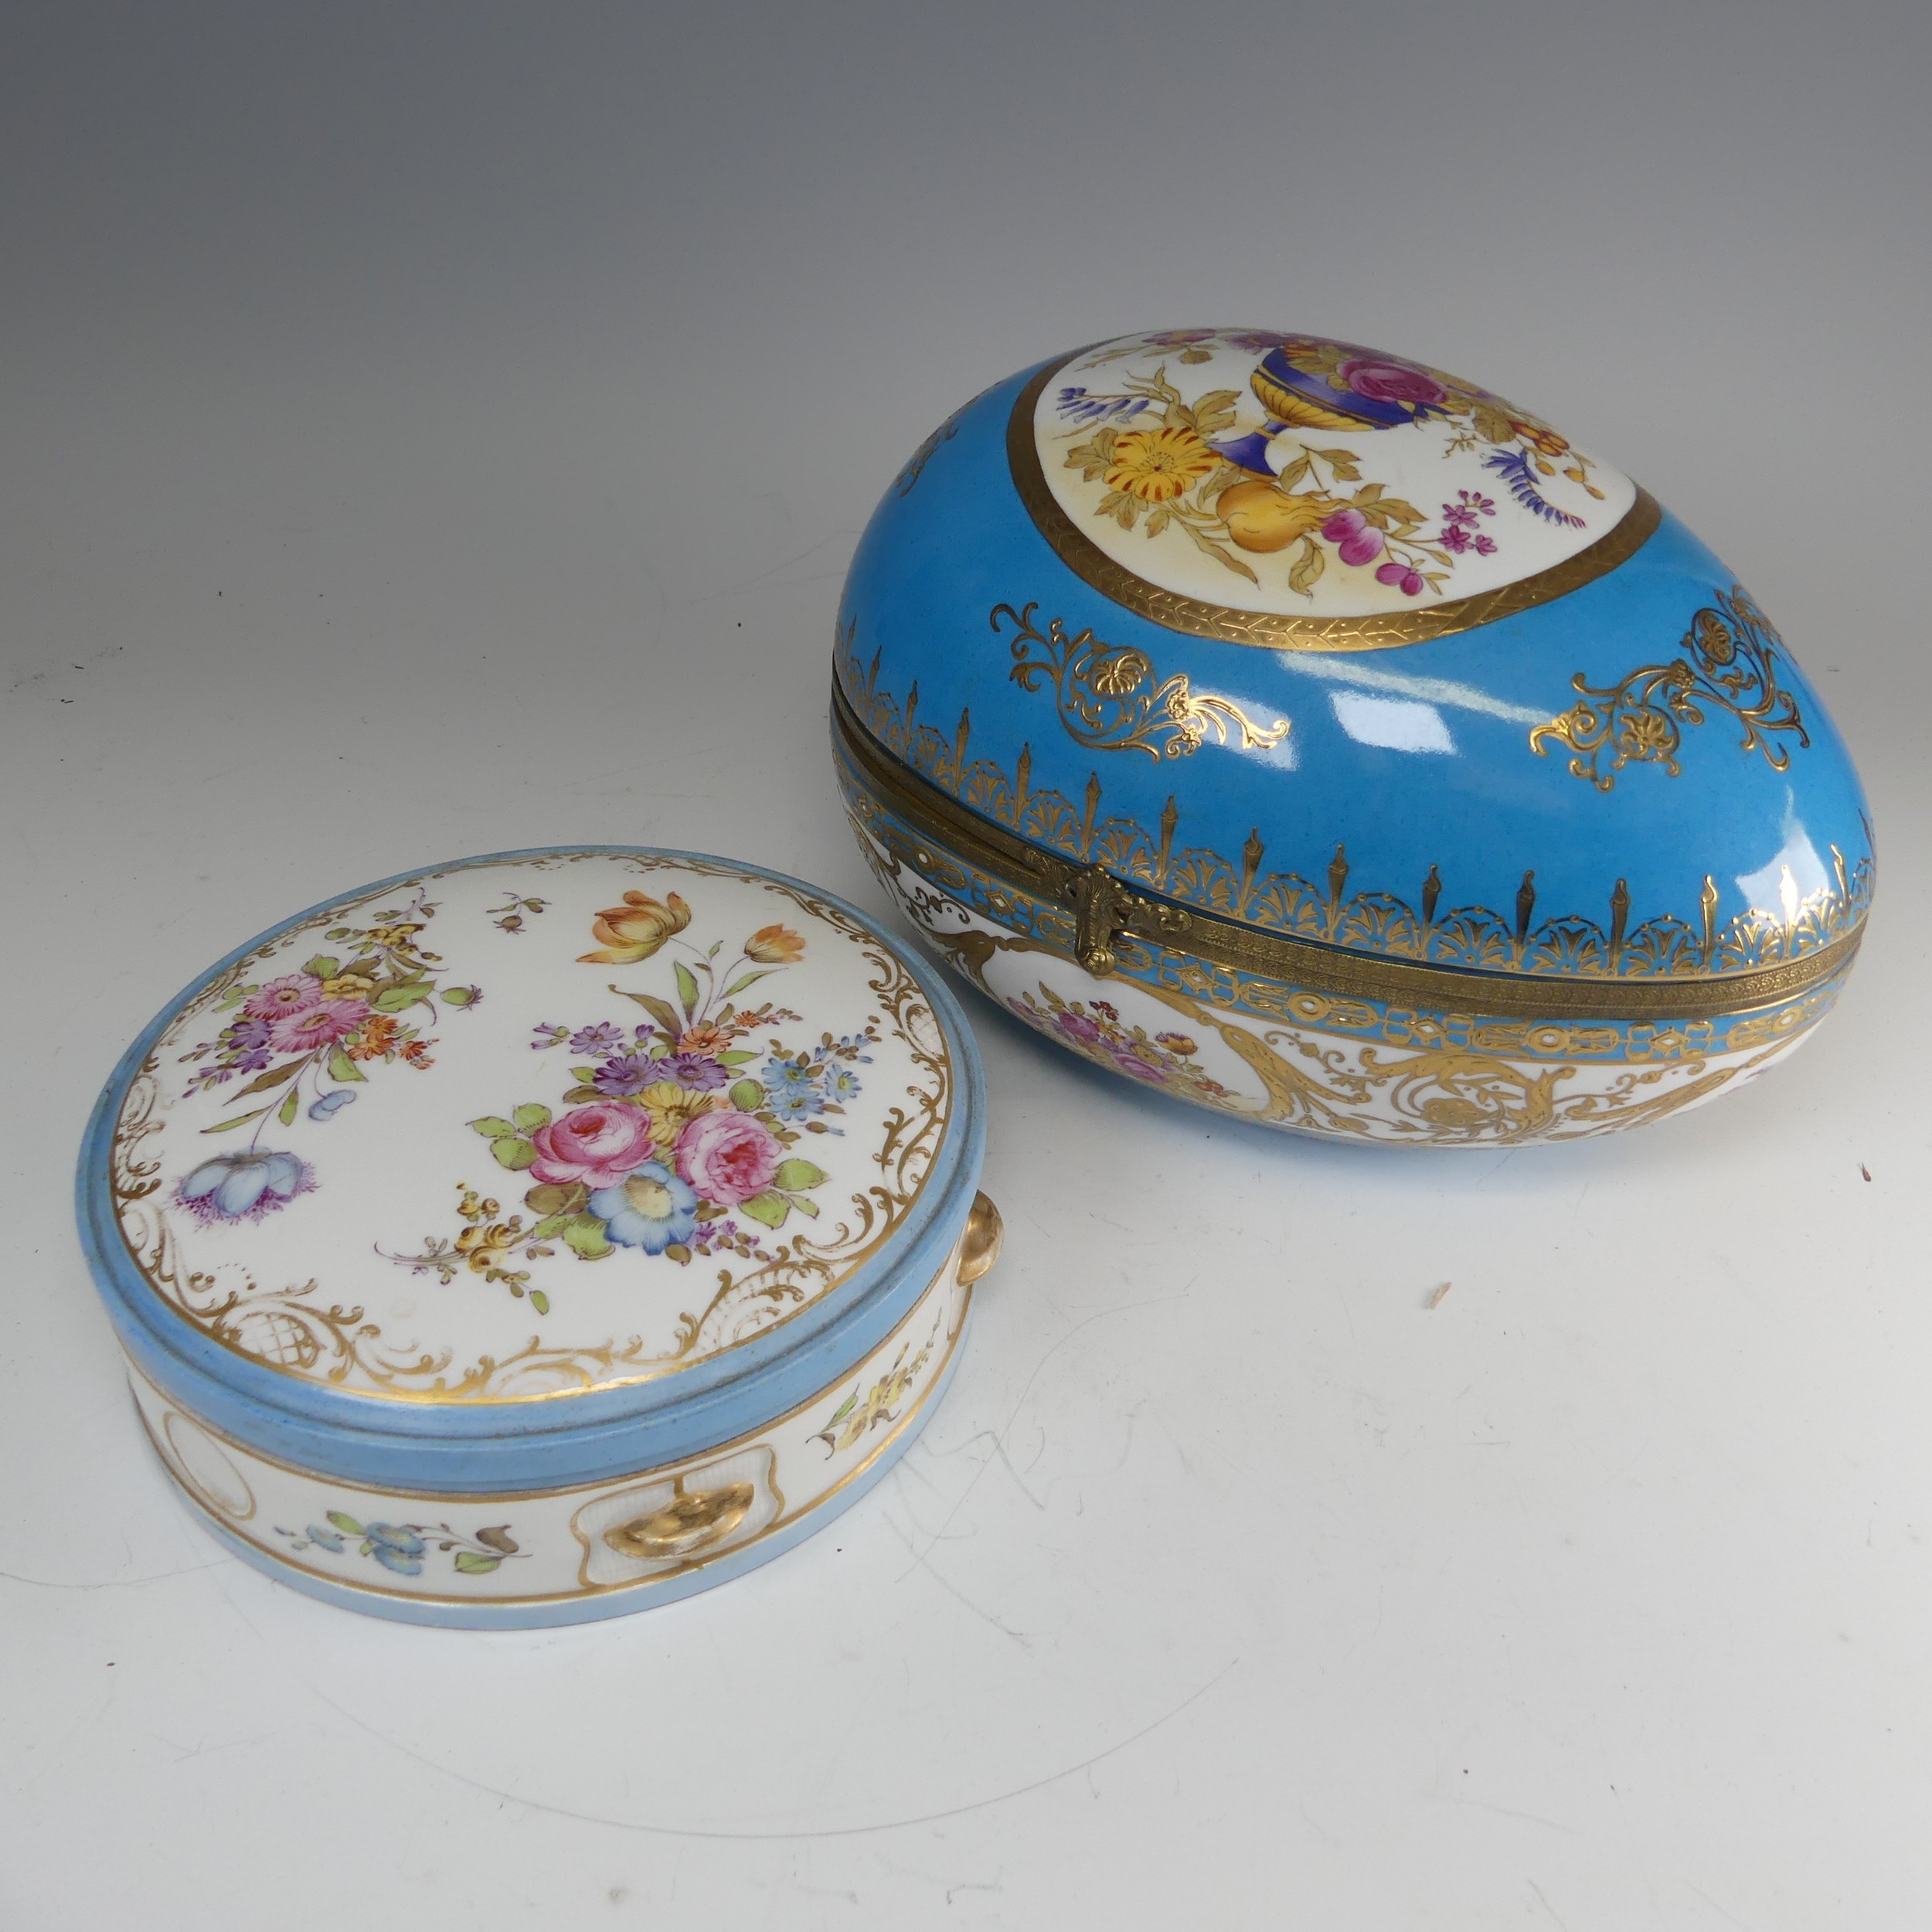 A continental porcelain Sevres style egg shaped Box, blue ground with gilt metal mount, decorated